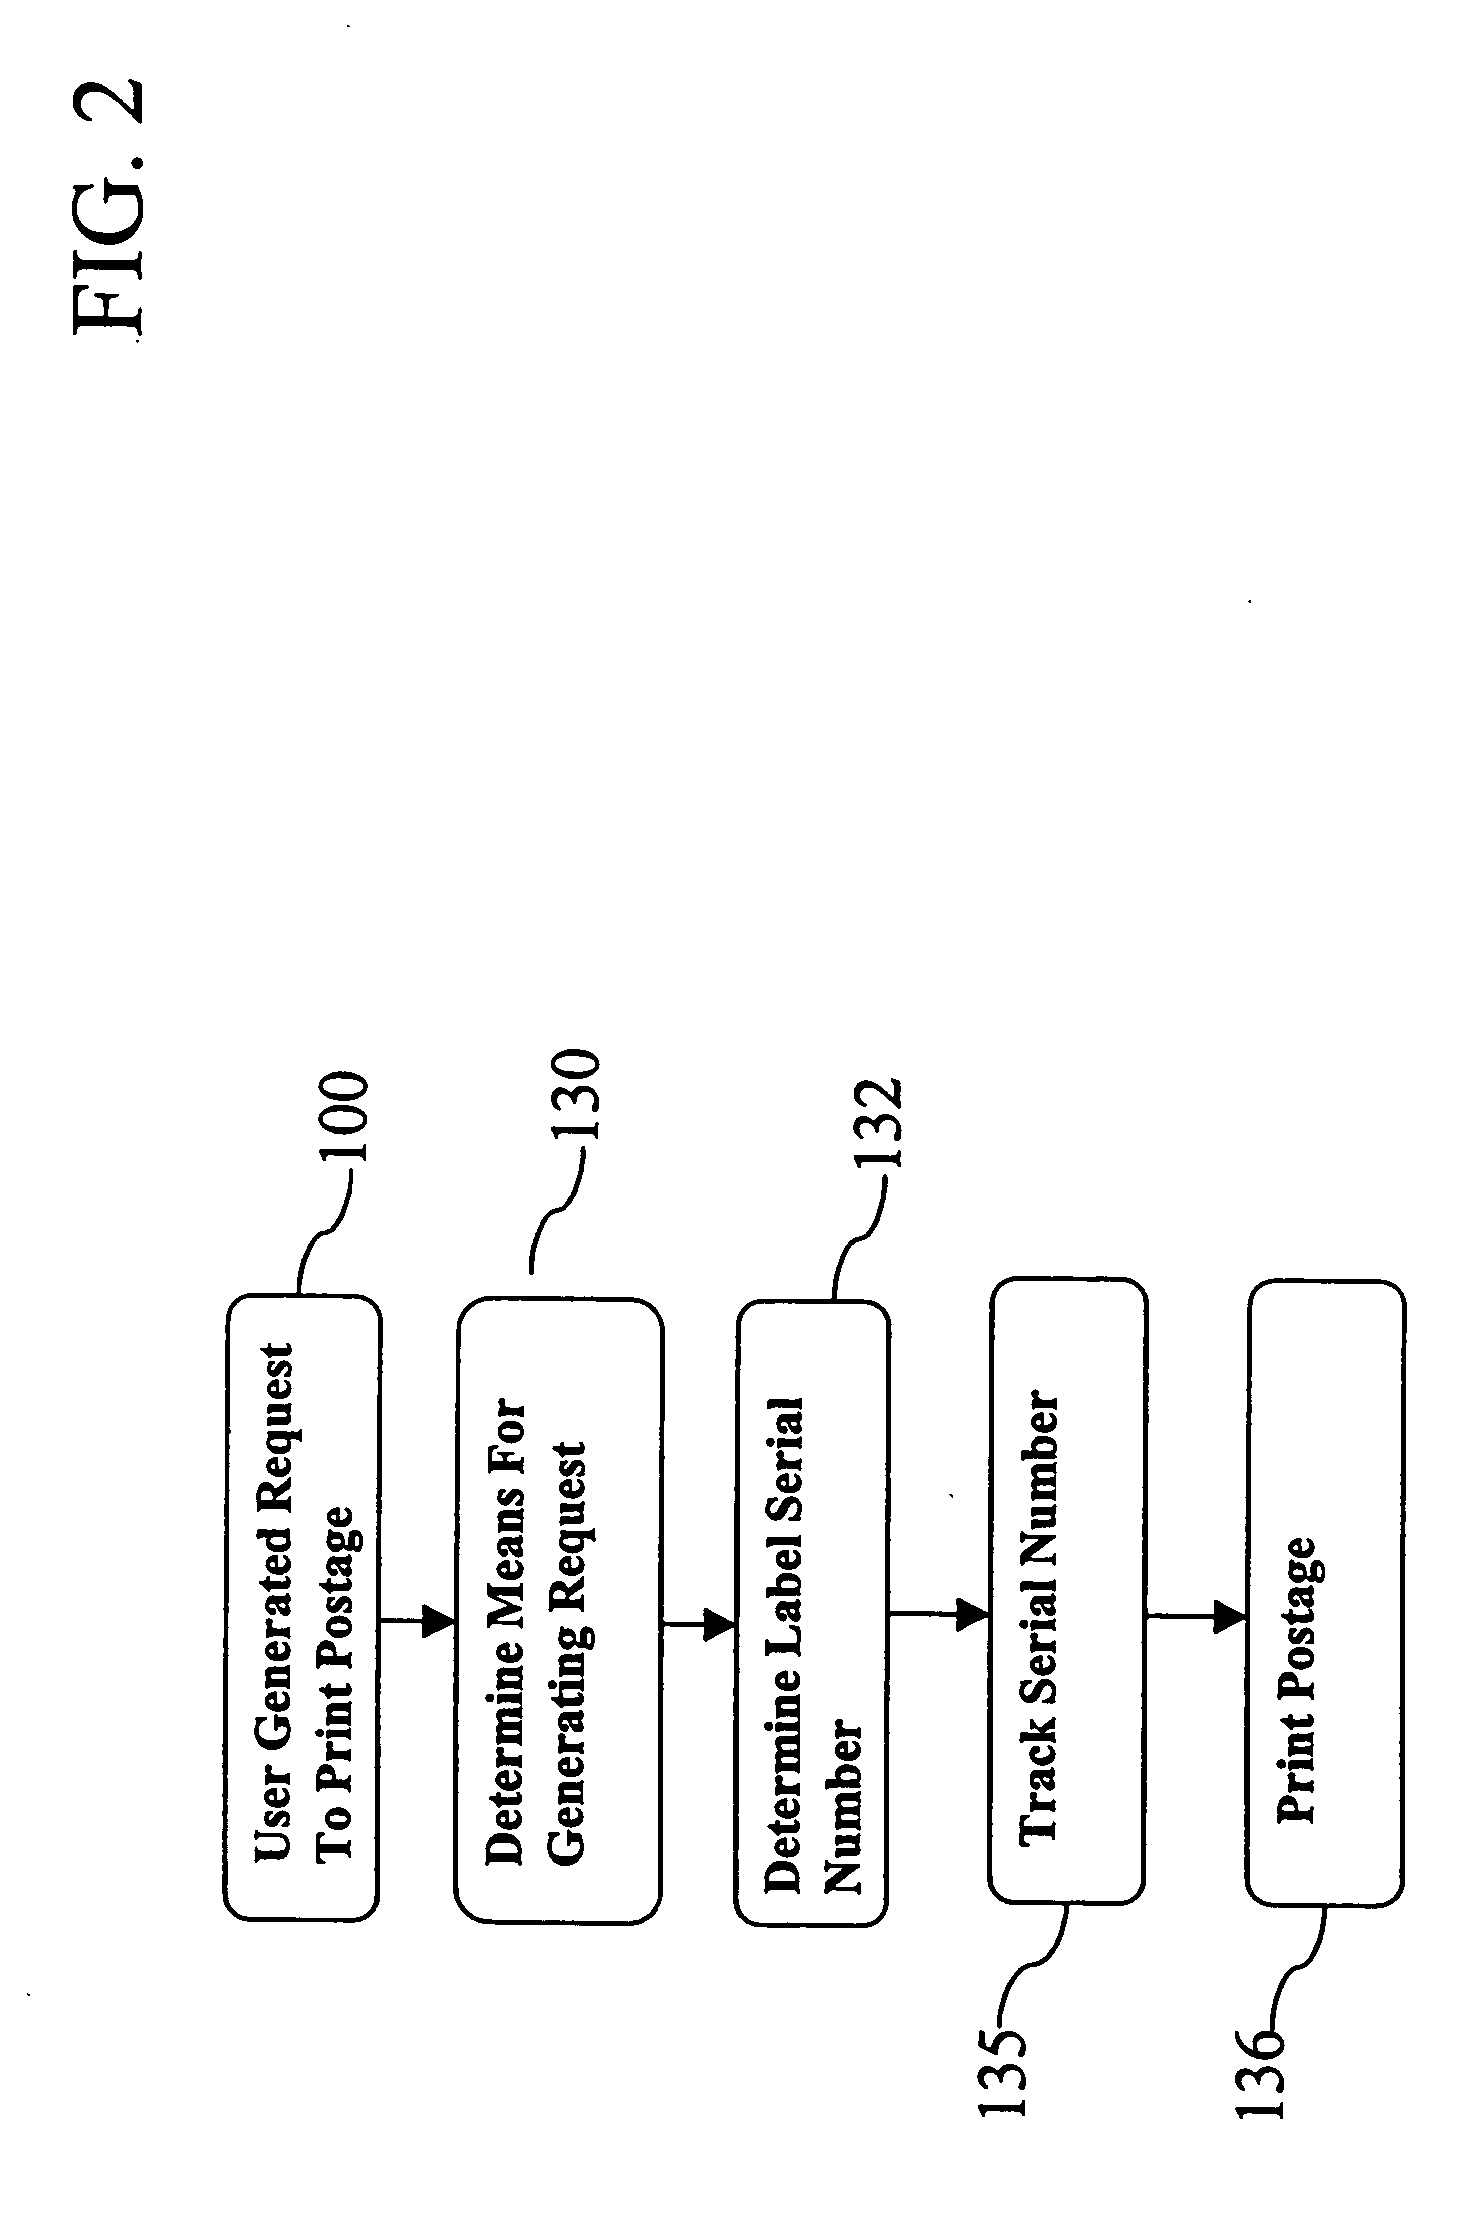 System and method for providing computer-based postage stamps